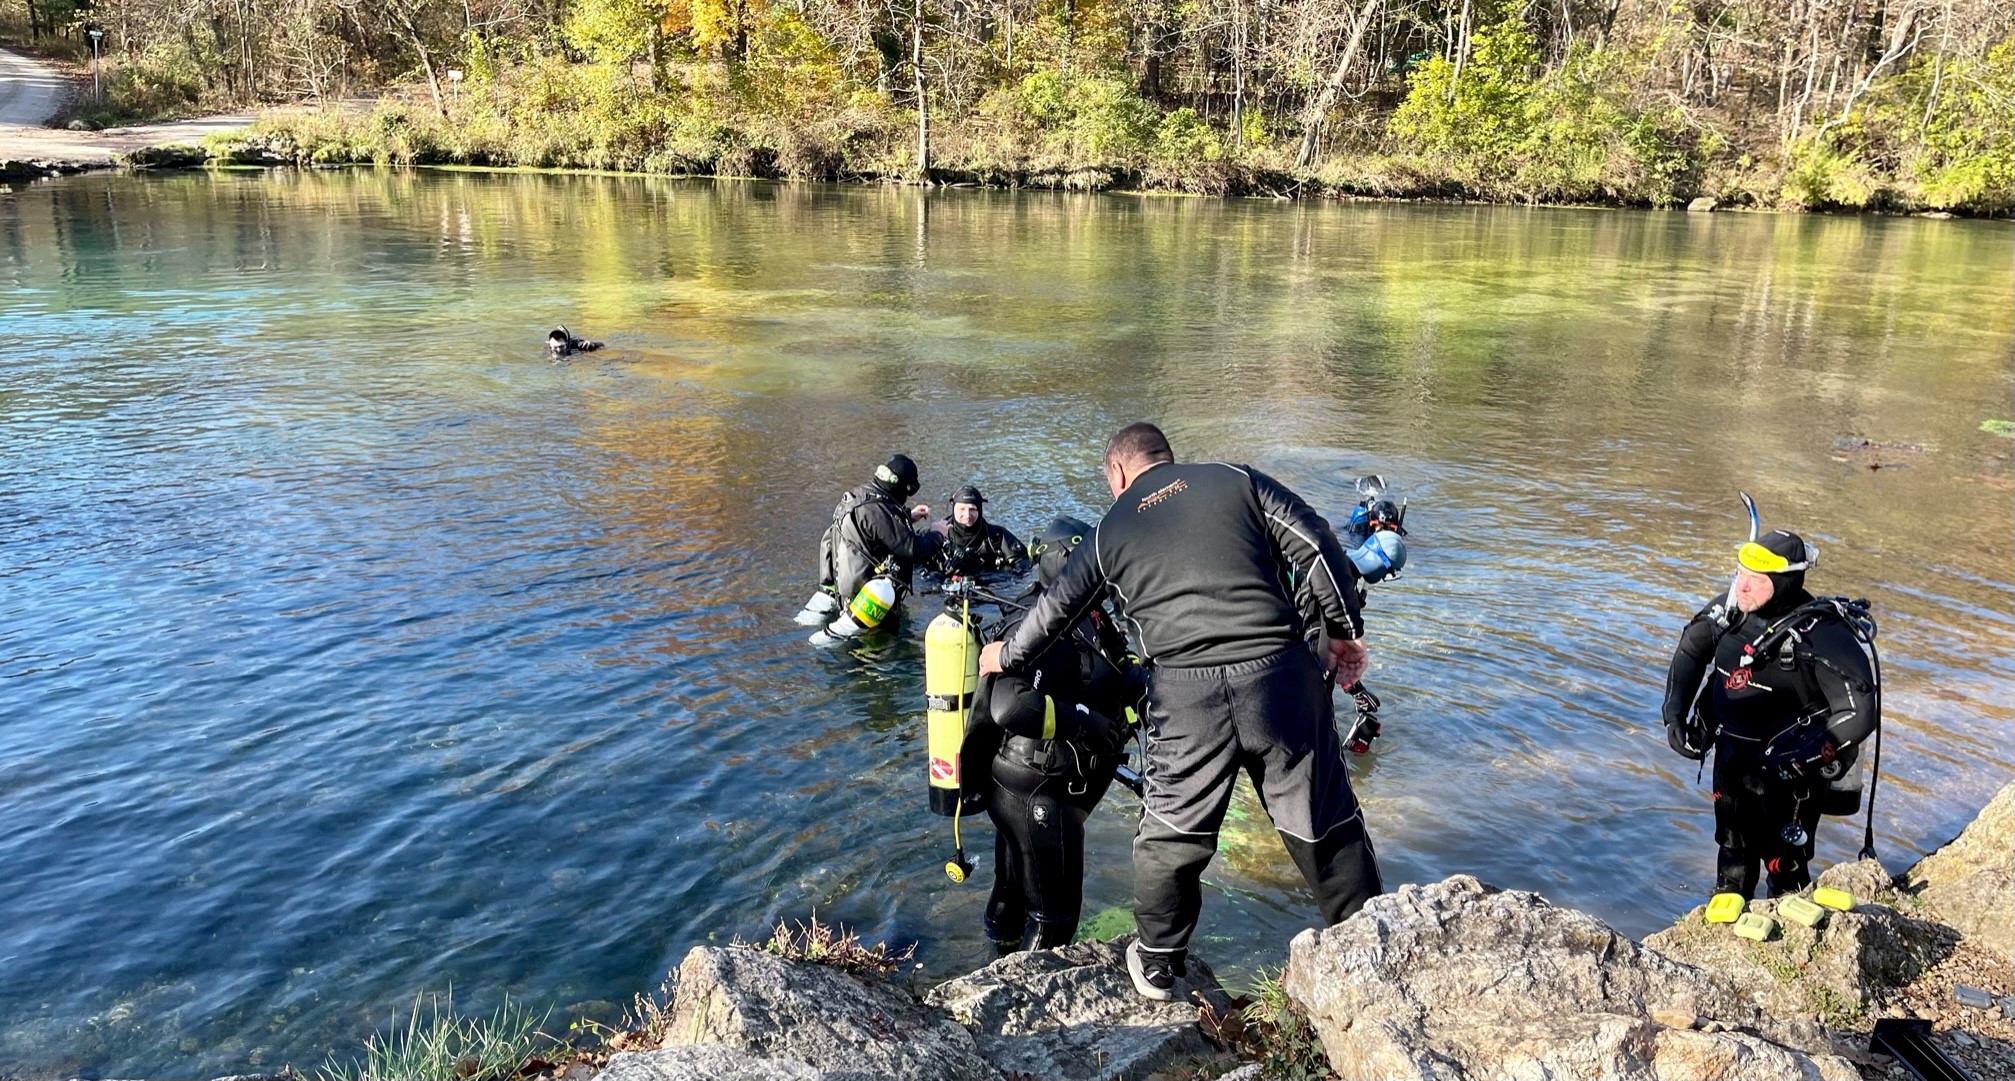 Divers entering the water